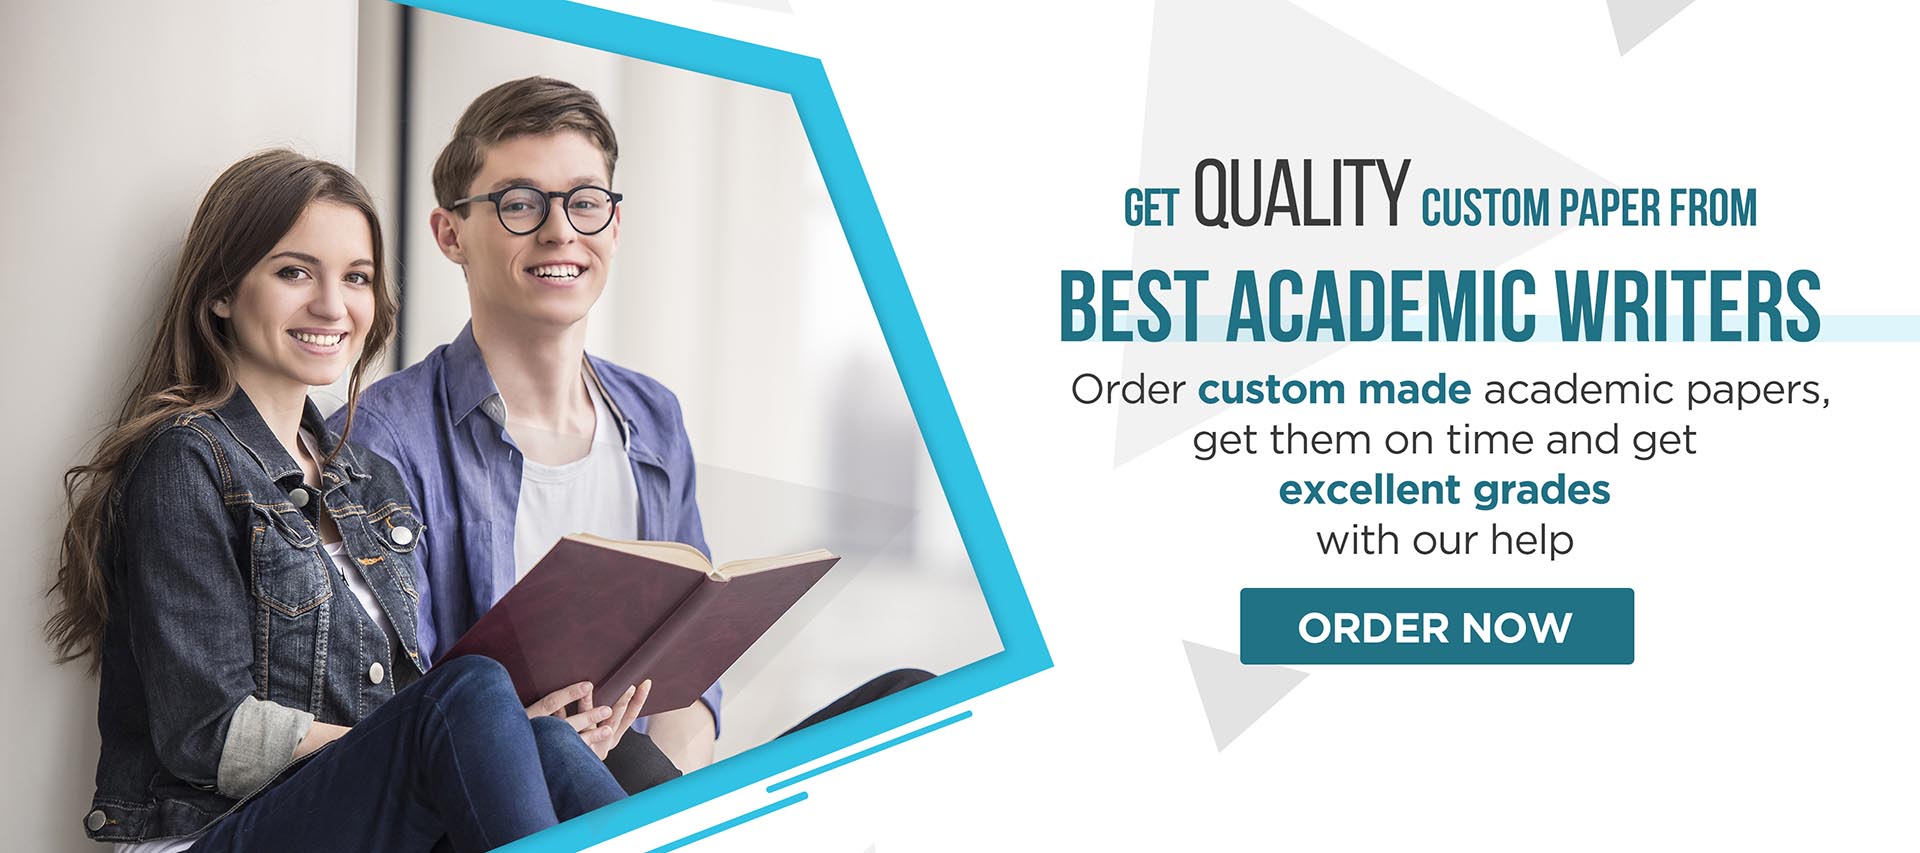 Best quality custom paper from Best Academic writers.